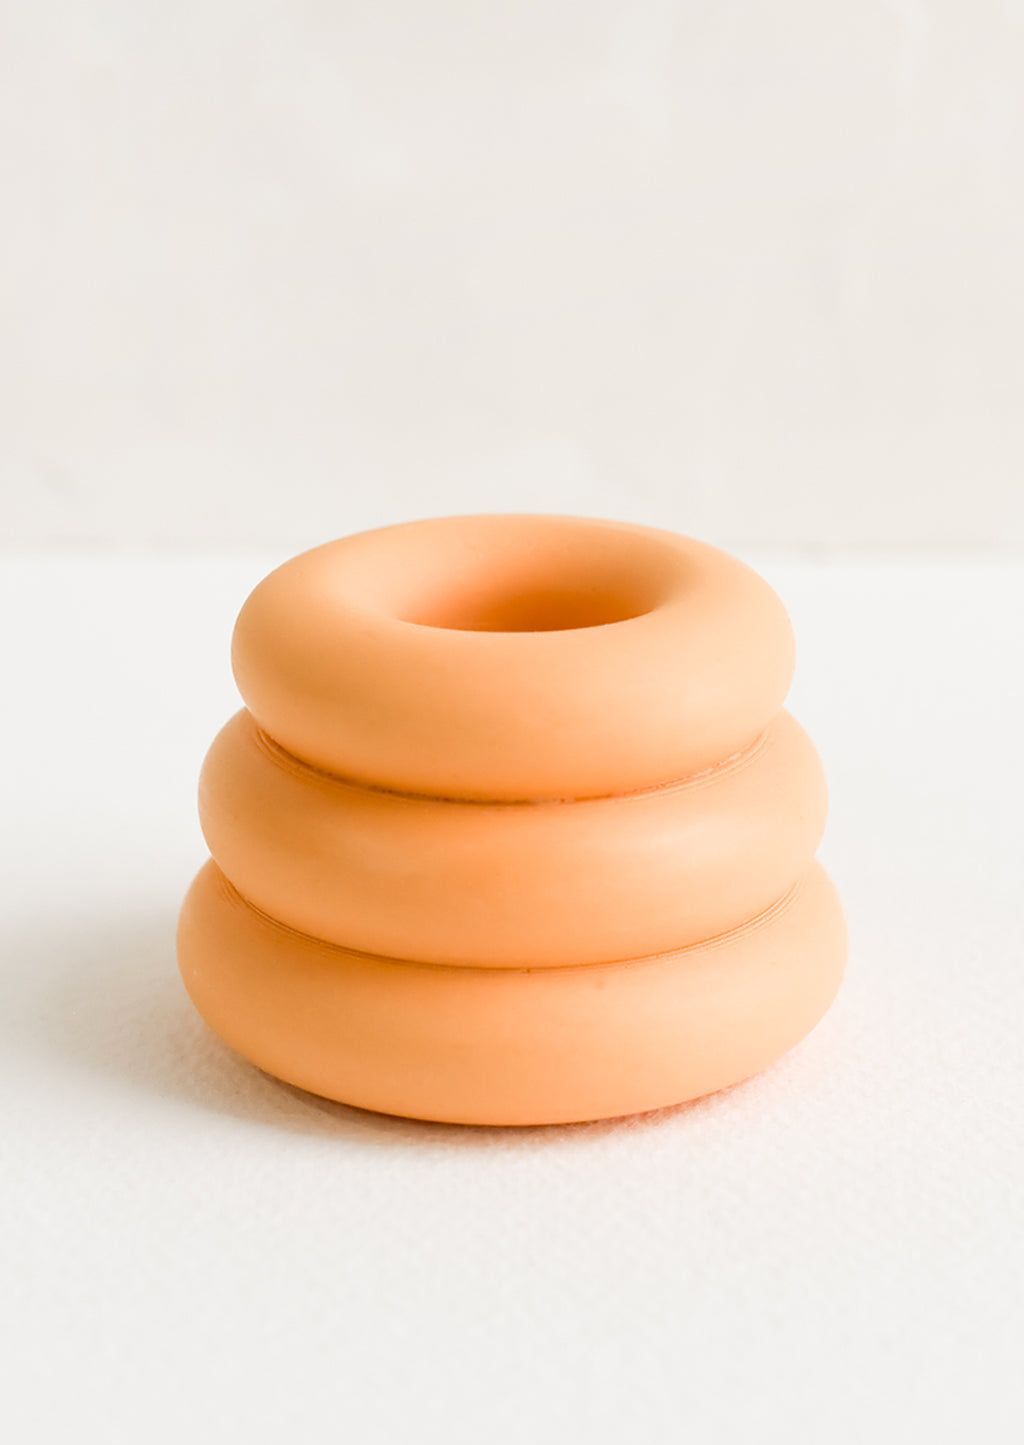 Sherbet: A taper candle holder with 3-layer stacked donut shape in sherbet orange.